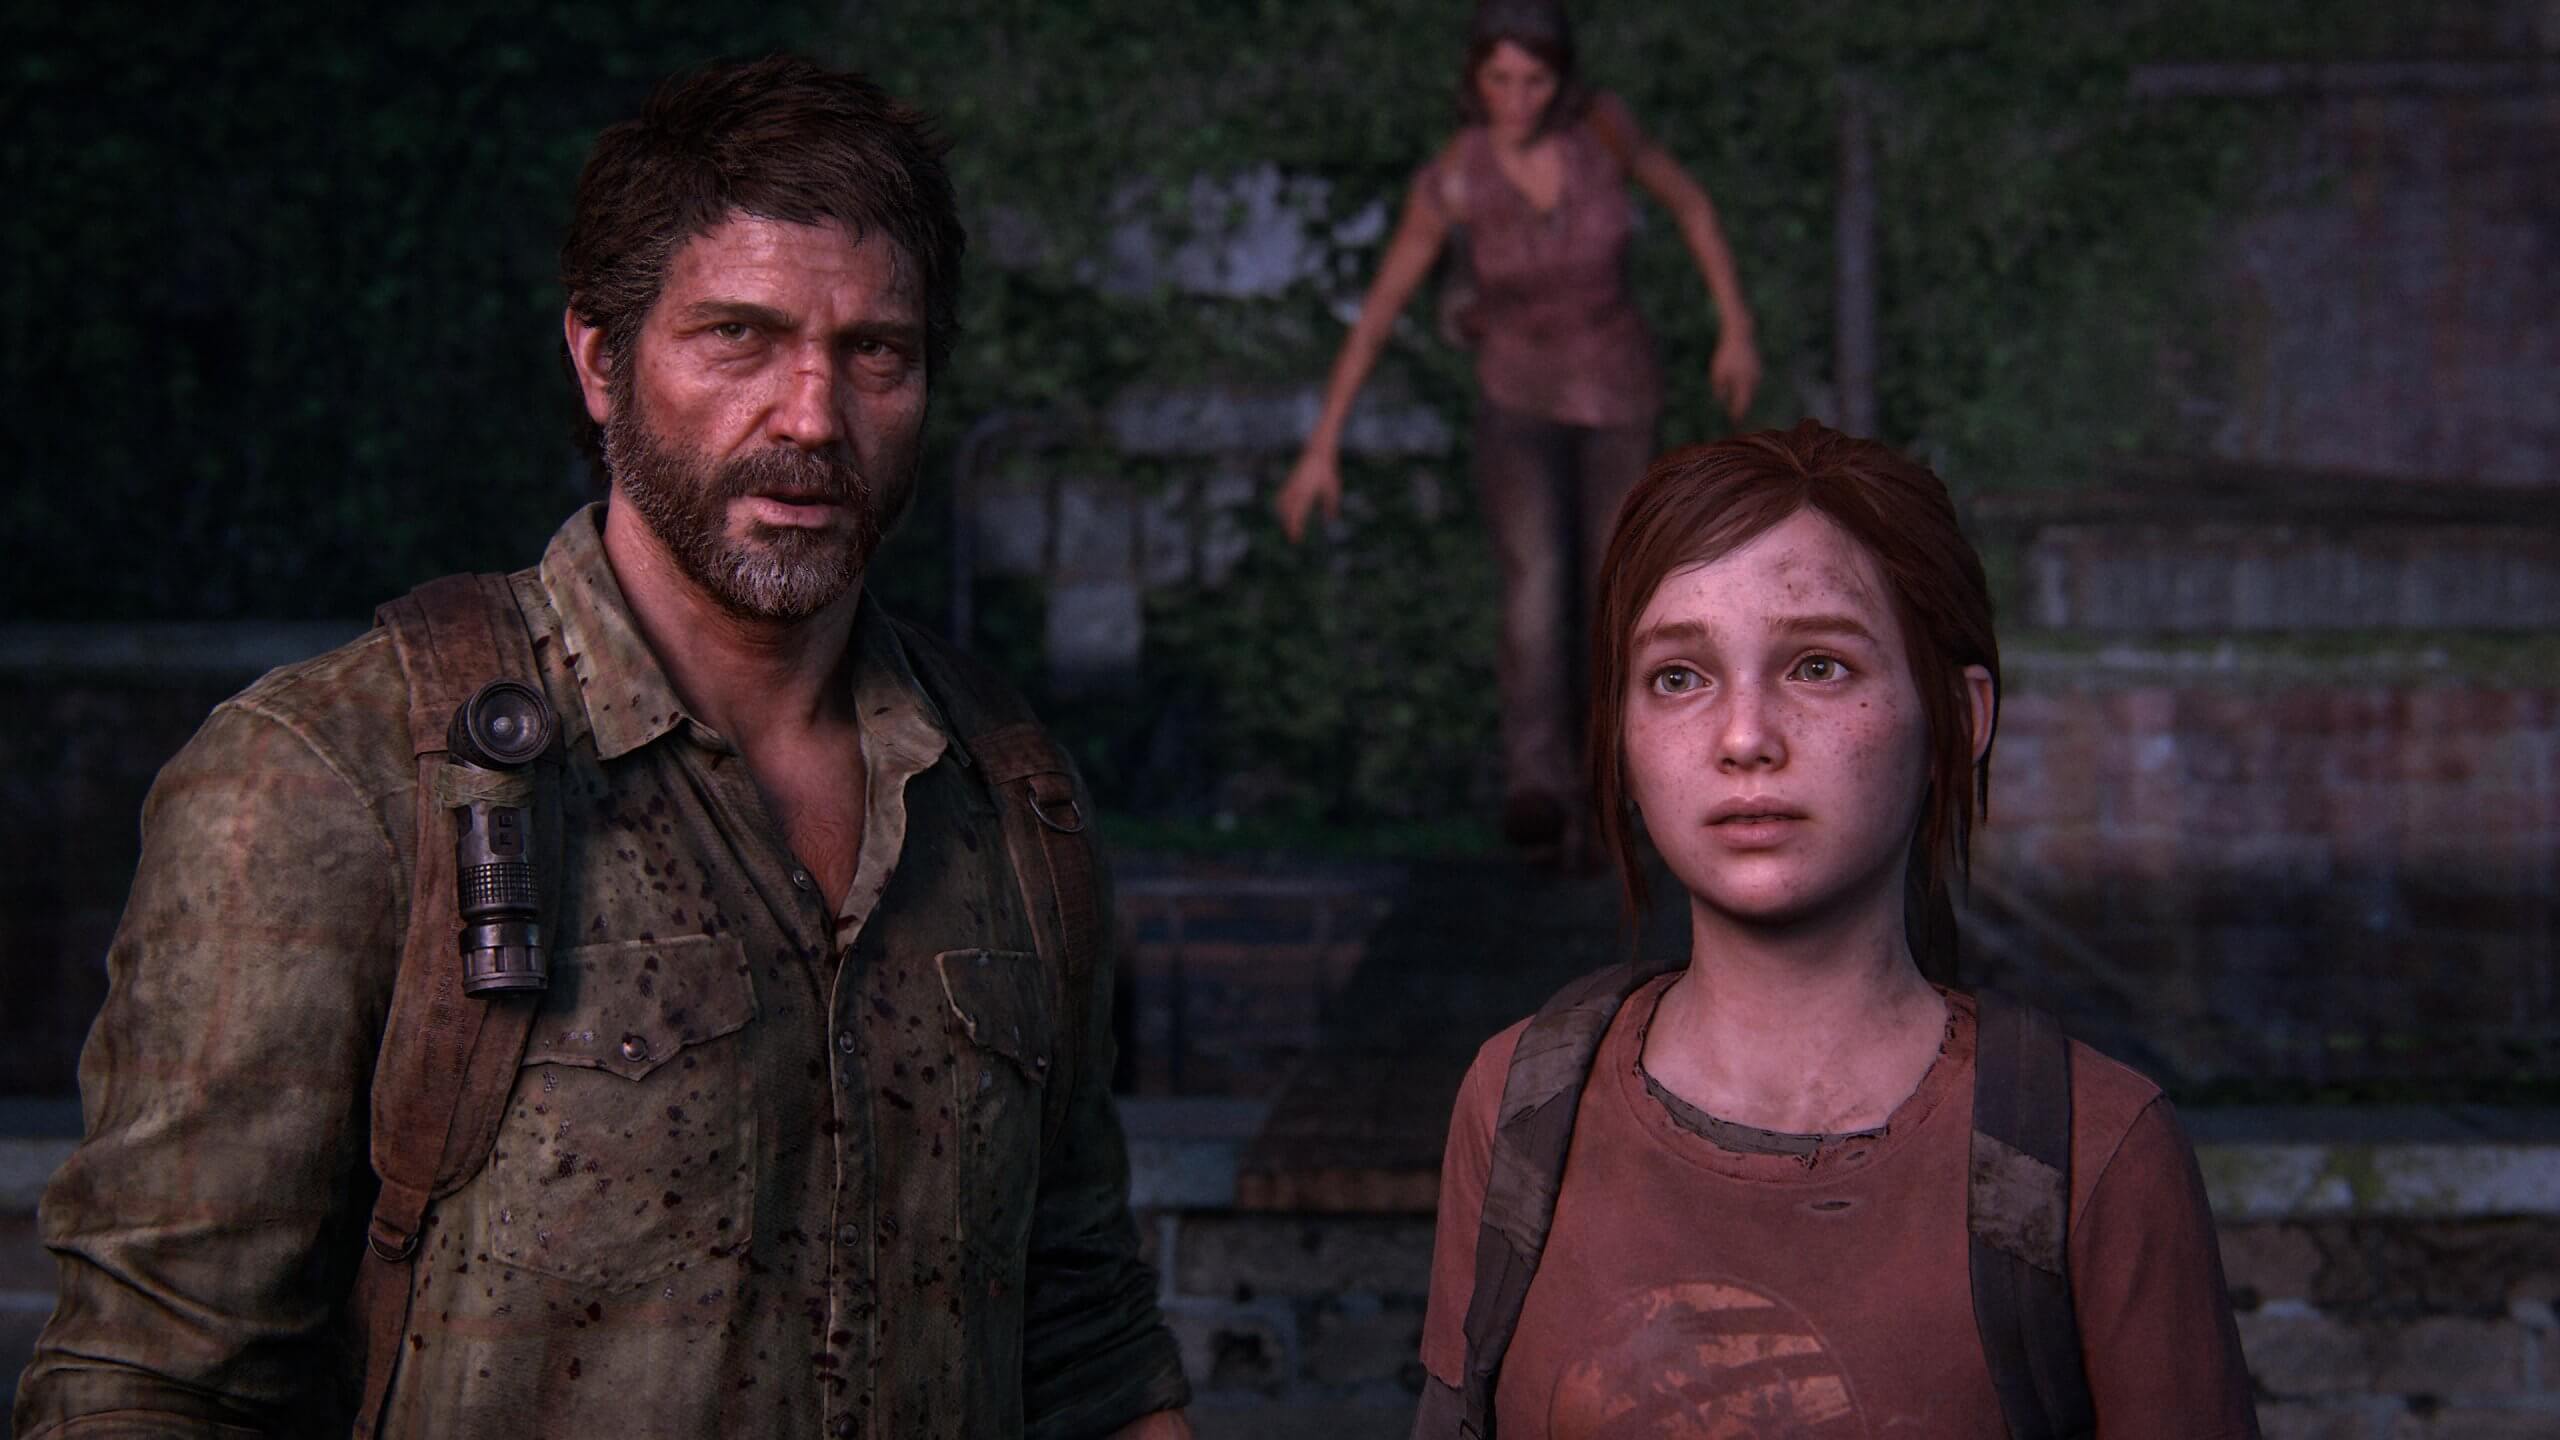 The Last Of Us on RPCS3 PS3 Emulator